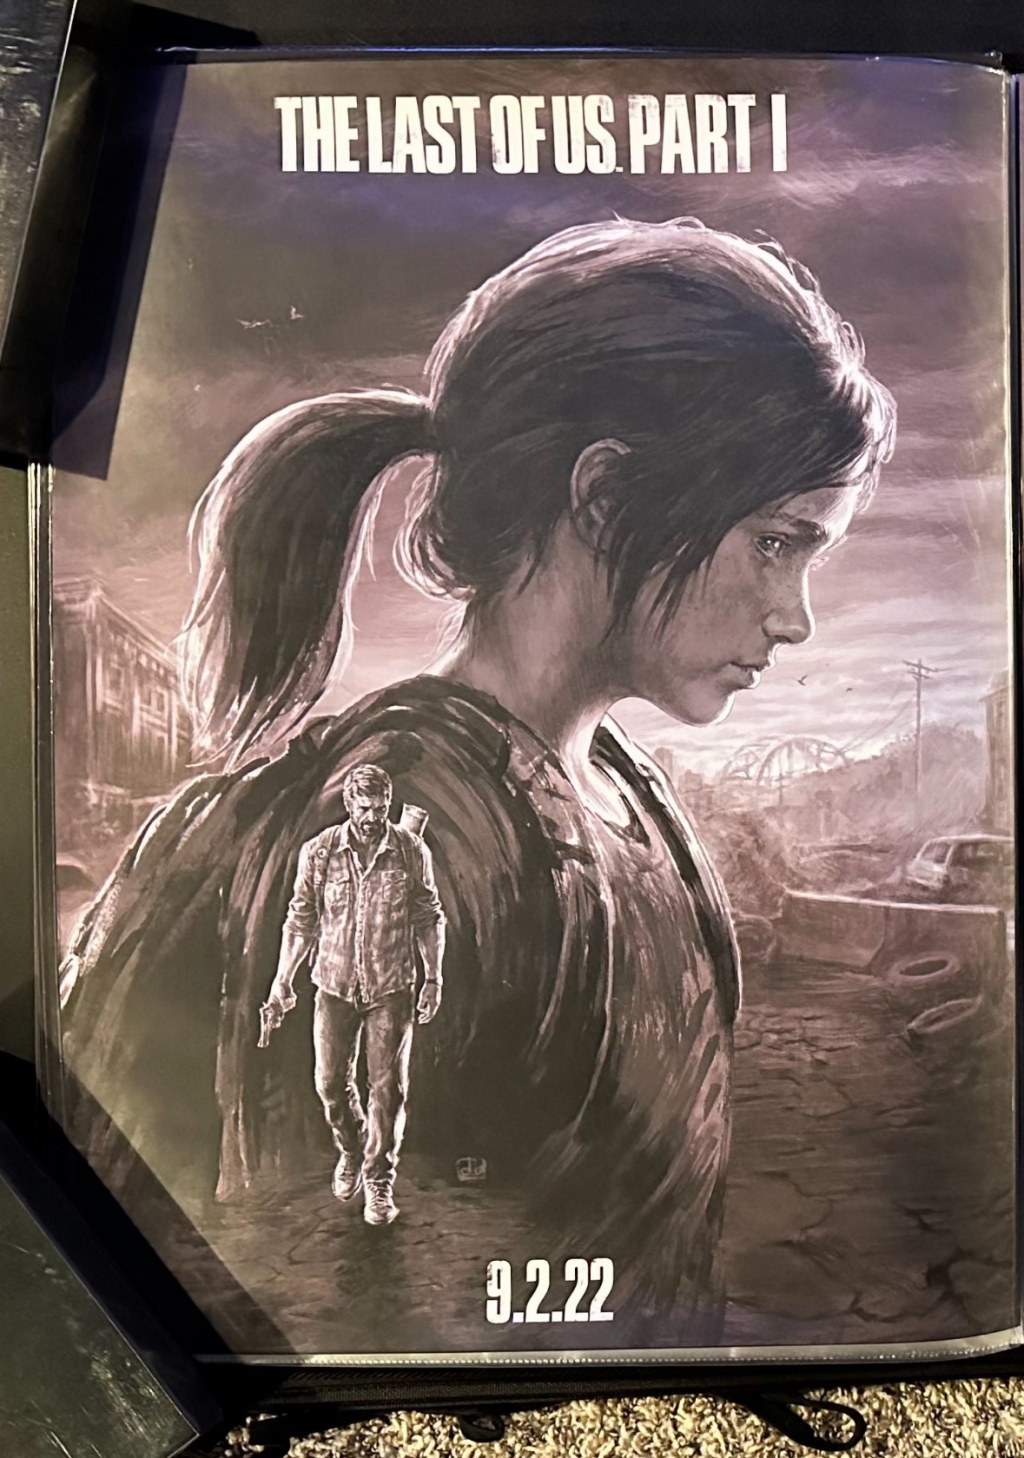 The Last of Us Part 1 Remake Launch Party Poster